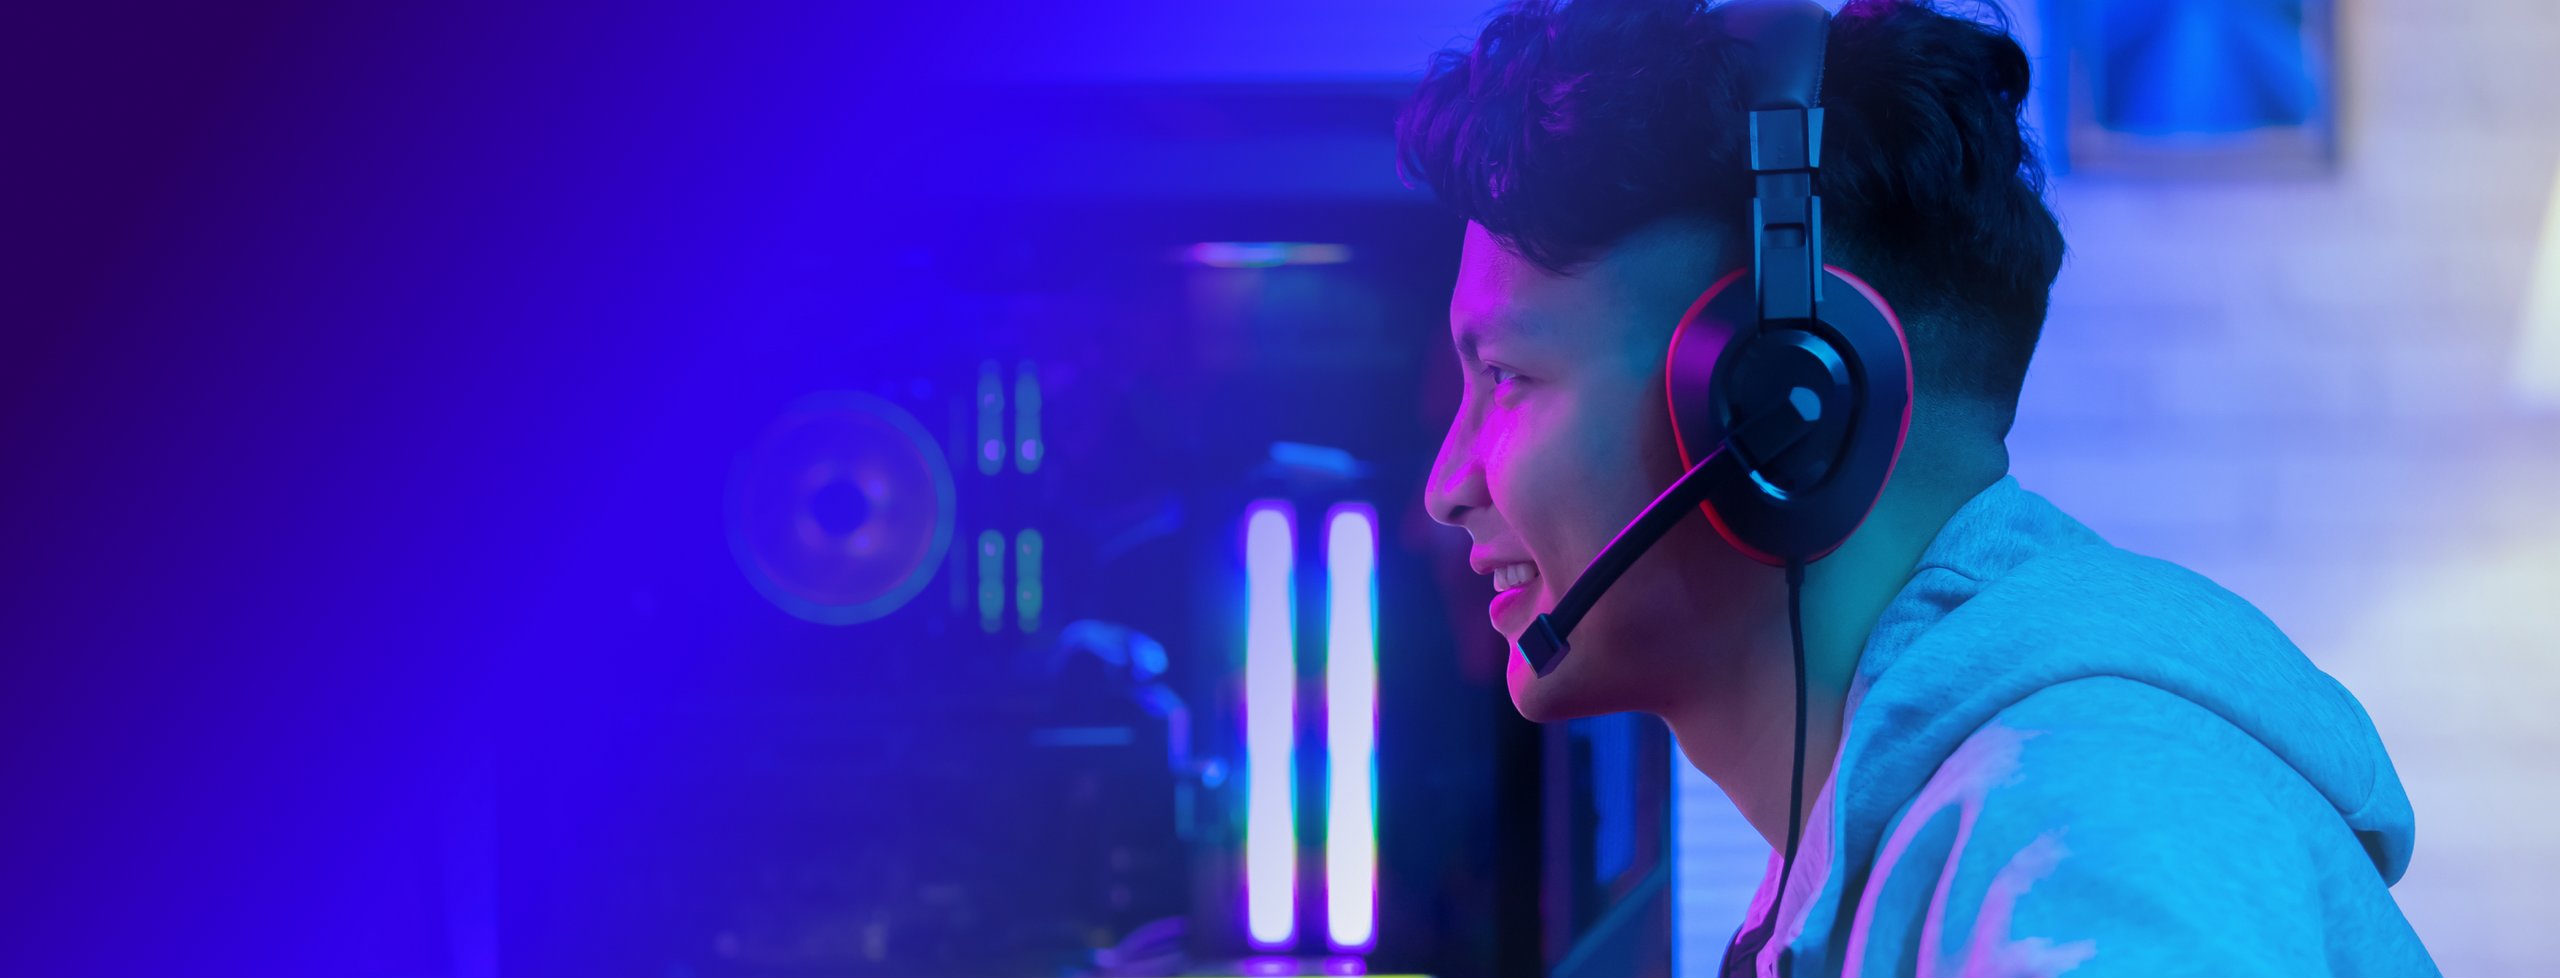 a young man wearing a headset while playing video games 